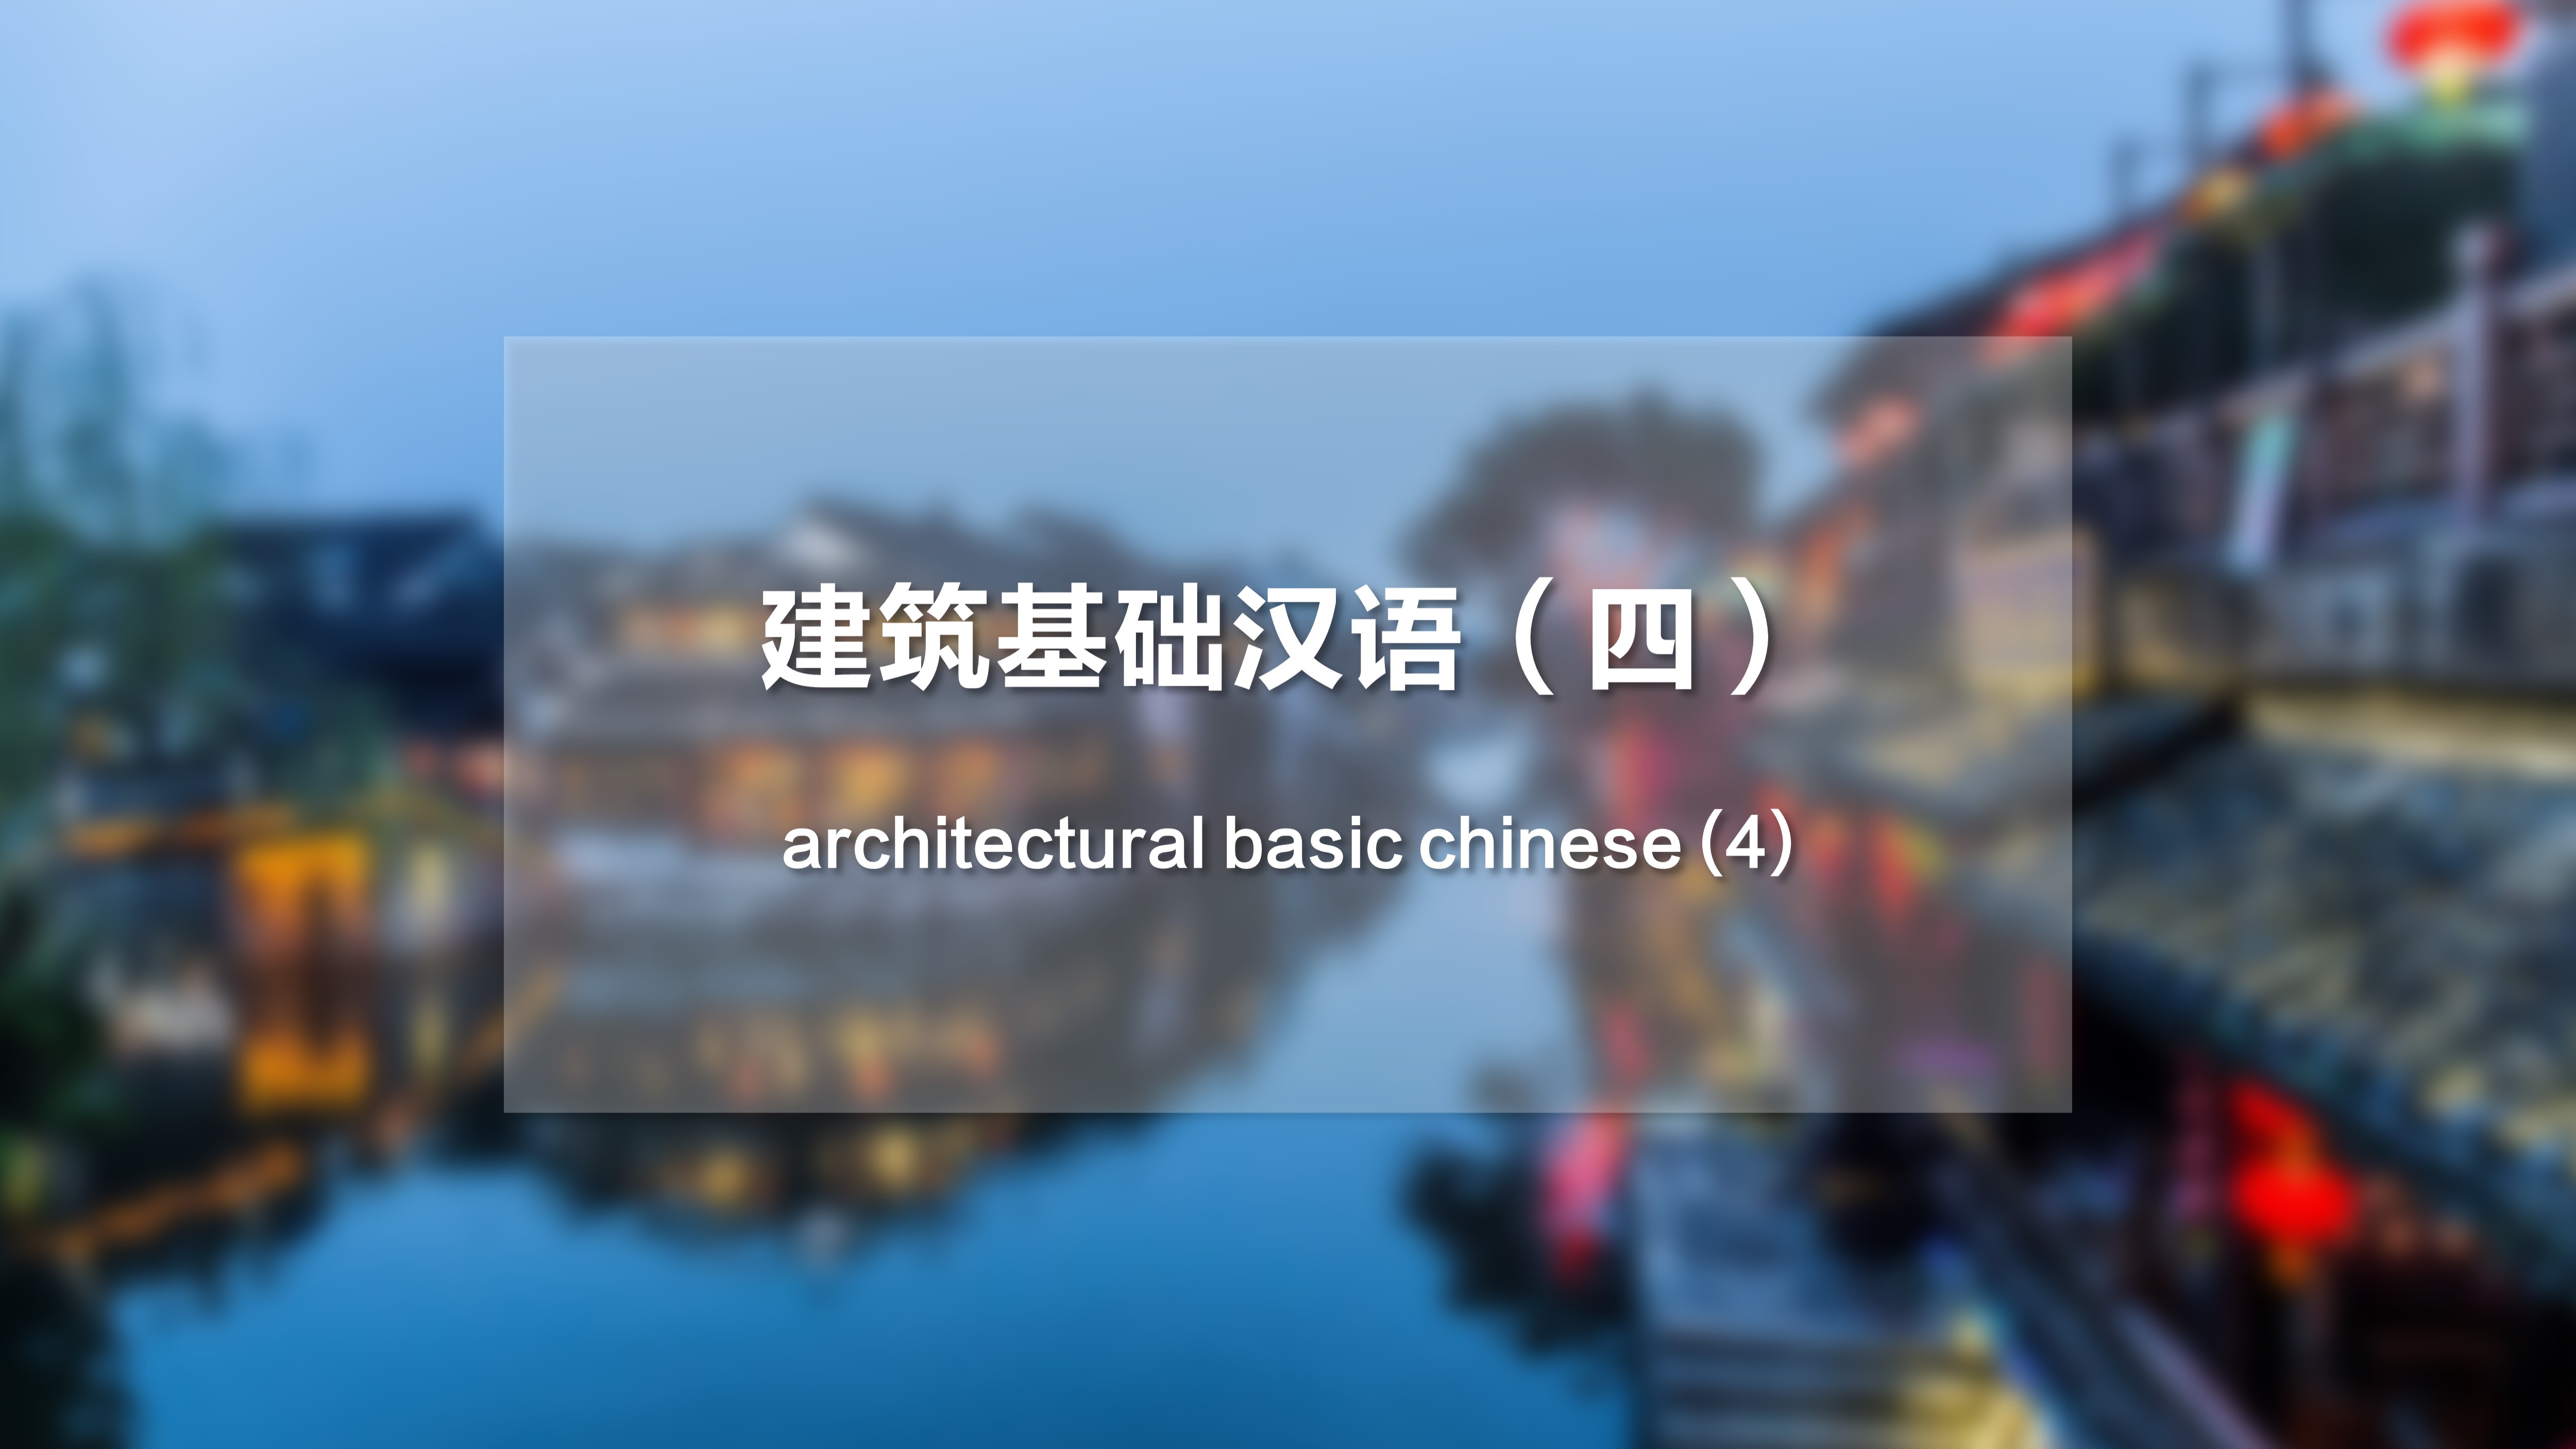 Architectural Basic Chinese (4)